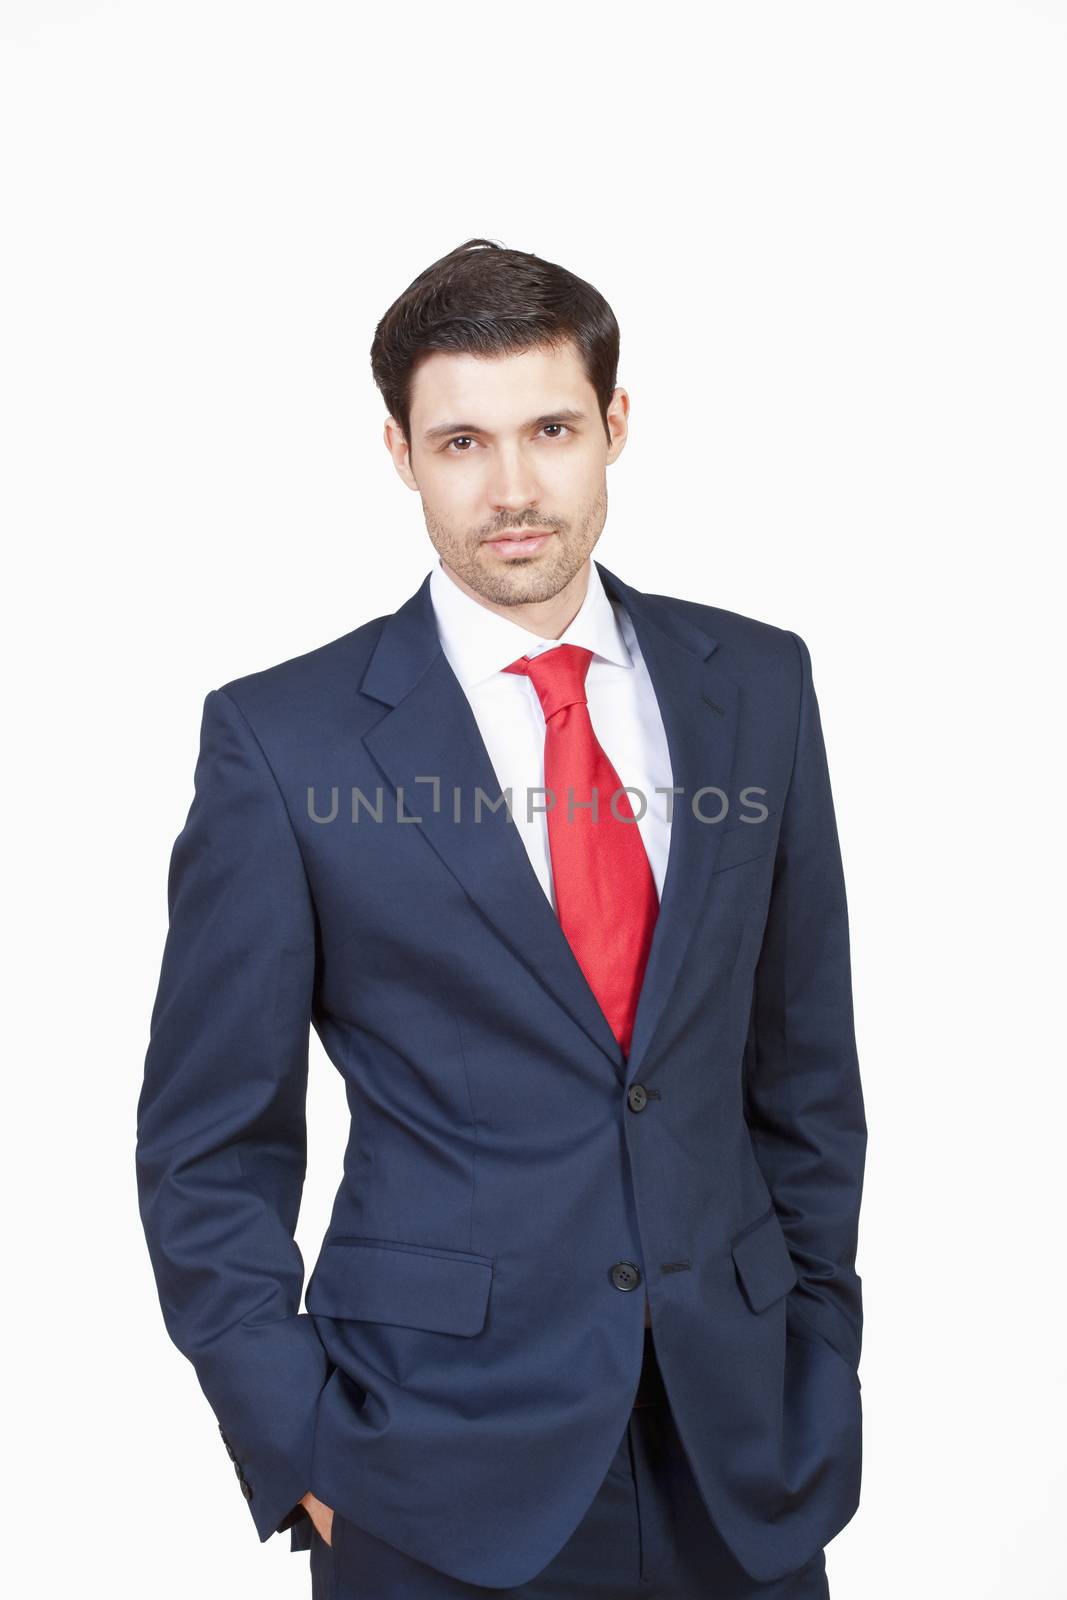 portrait handsome business executive in suit isolated on white